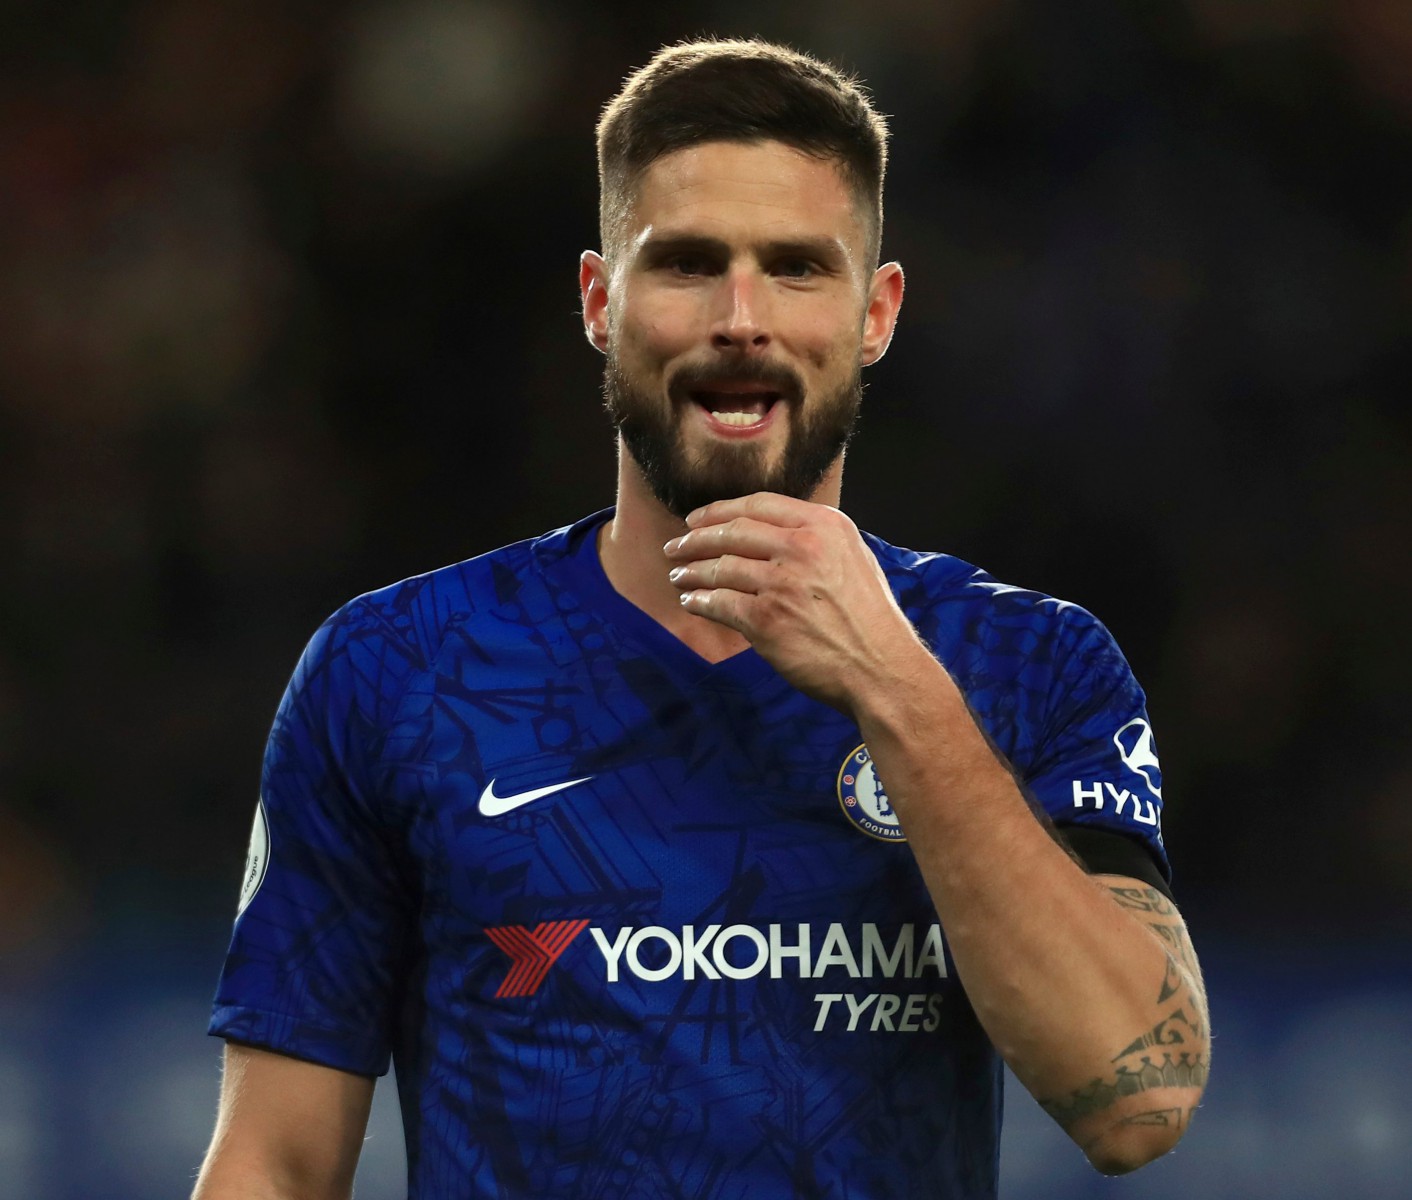 Chelsea striker Olivier Giroud is reportedly days away from completing a move to Inter Milan